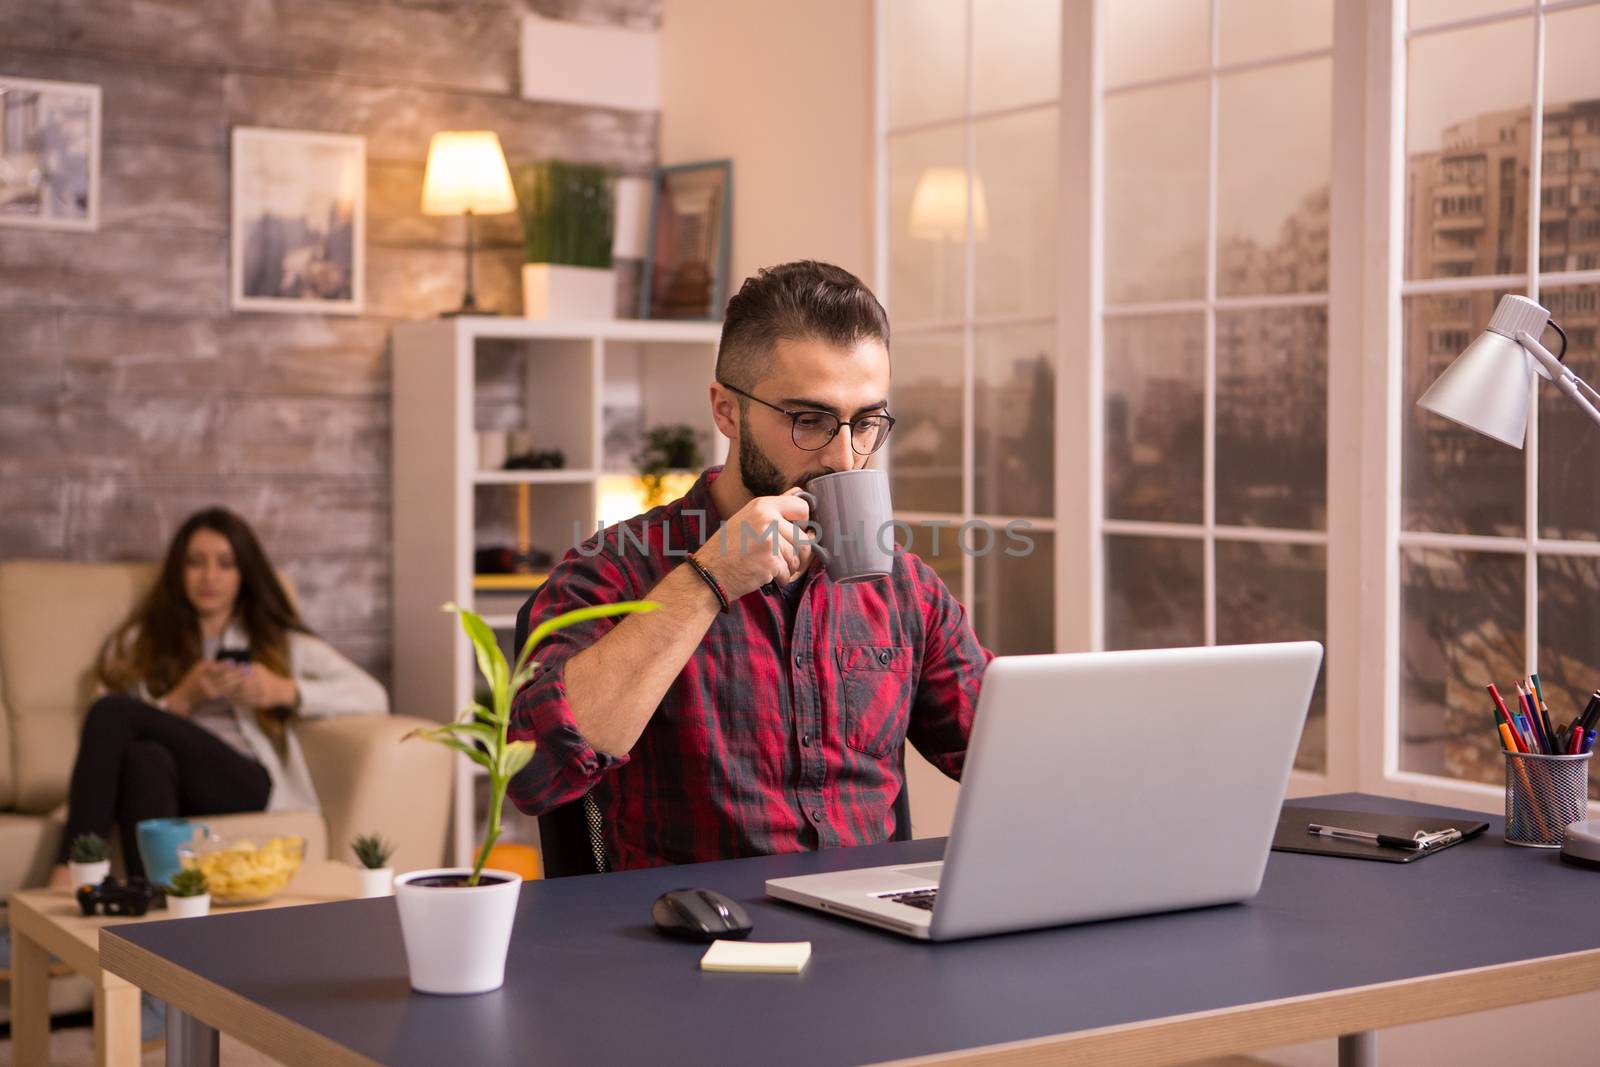 Bearded caucasian entrepreneur taking a sip of coffee while working on laptop in living room. Girlfriend on sofa in the background browsing on phone. Chips on table.